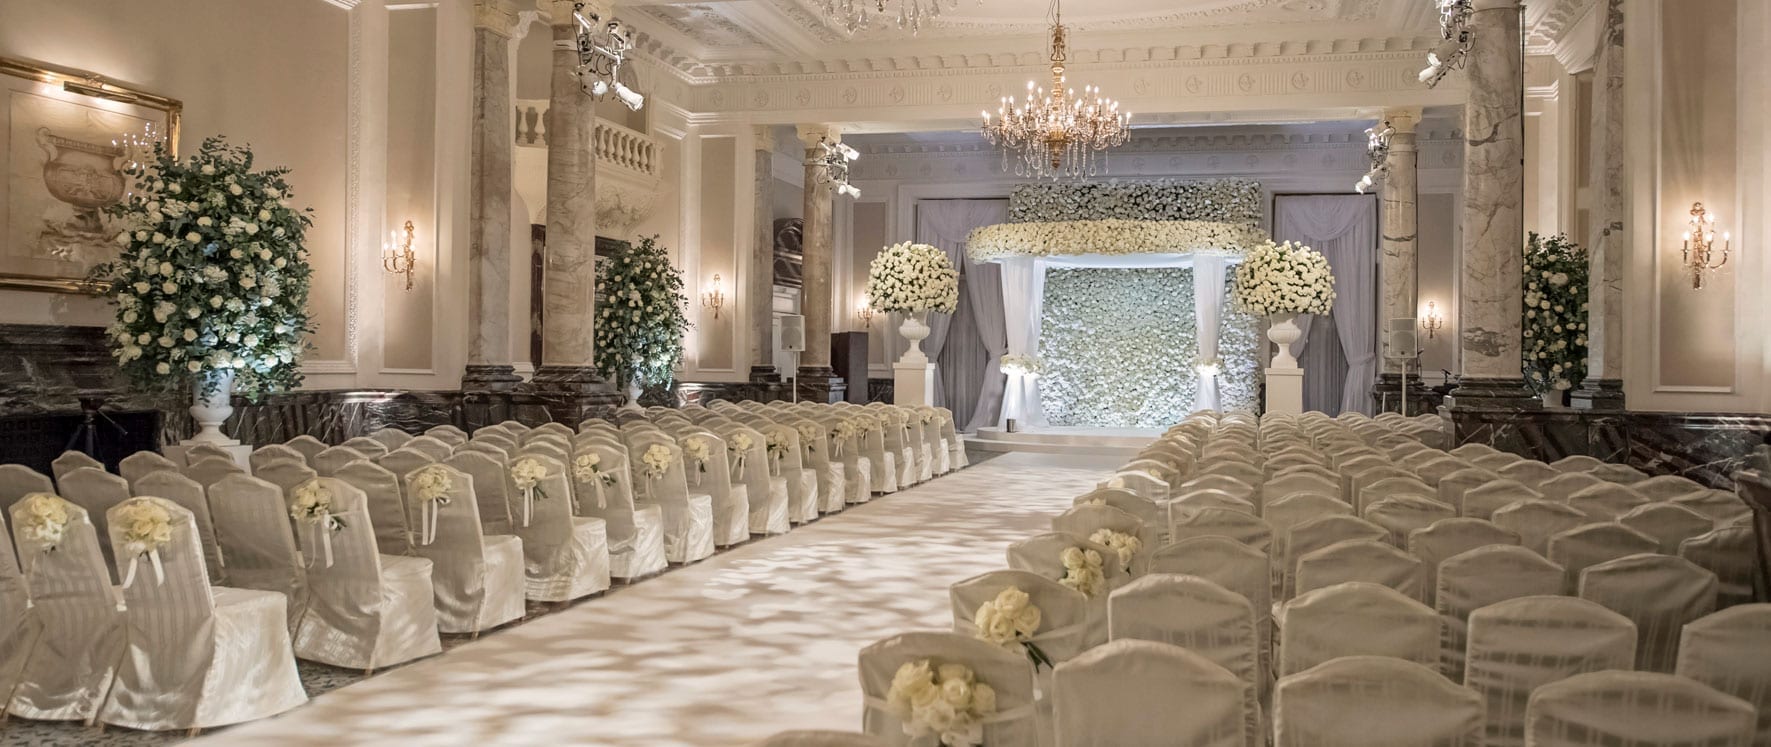 Luxury Wedding Venues for 300 Guests